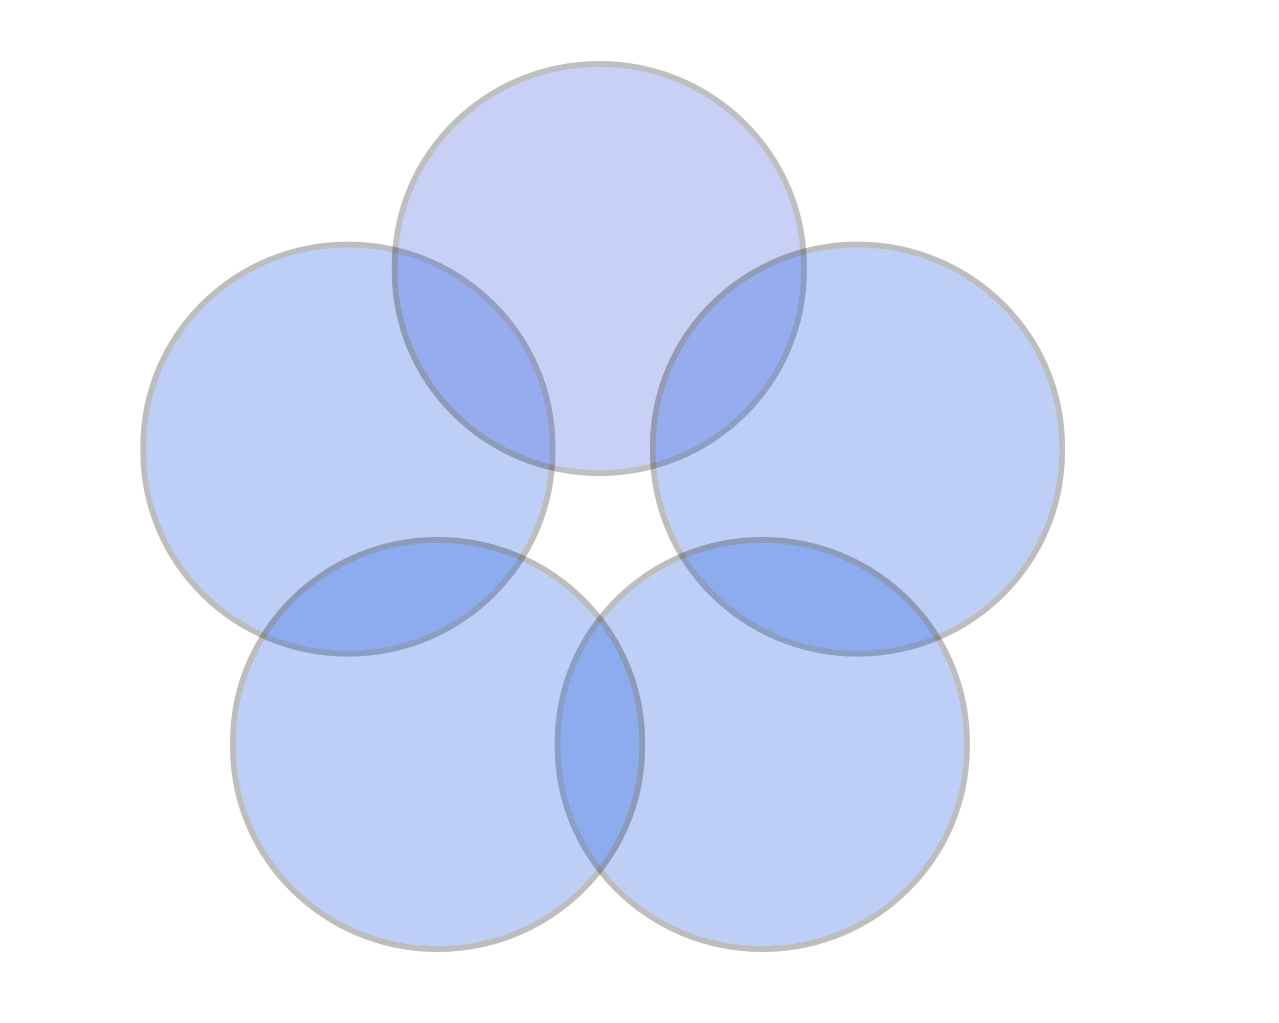 Area of Circles 